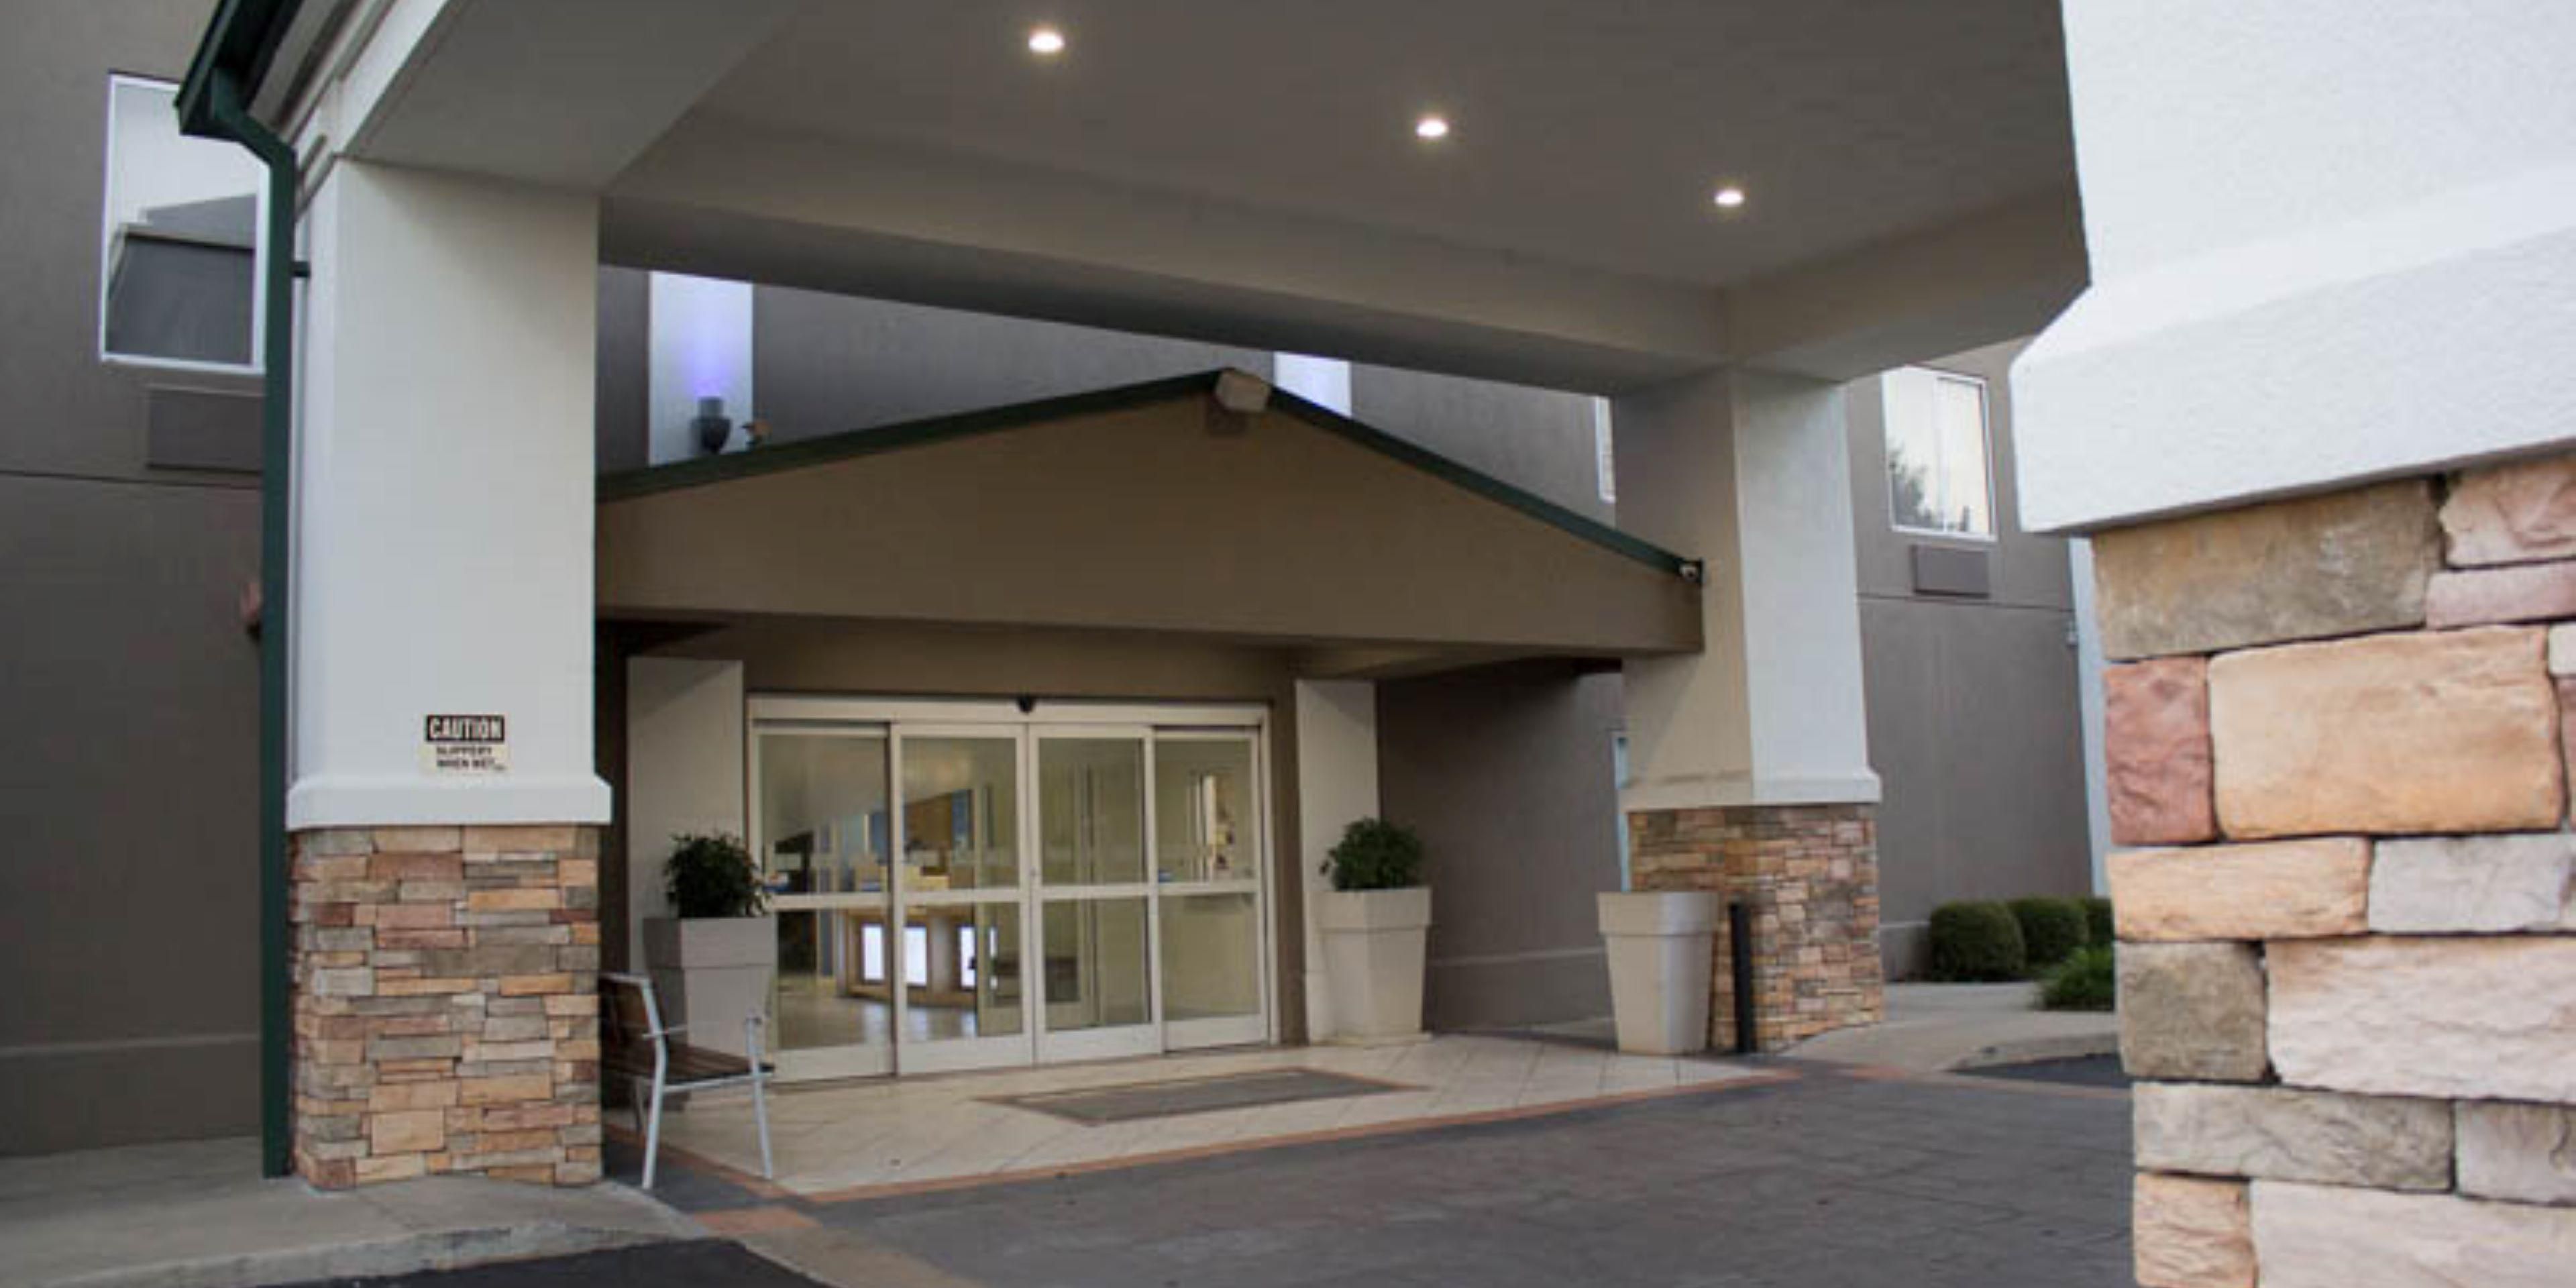 We offer great rates and close proximity to the new Two Kings Casino in King Mountain.